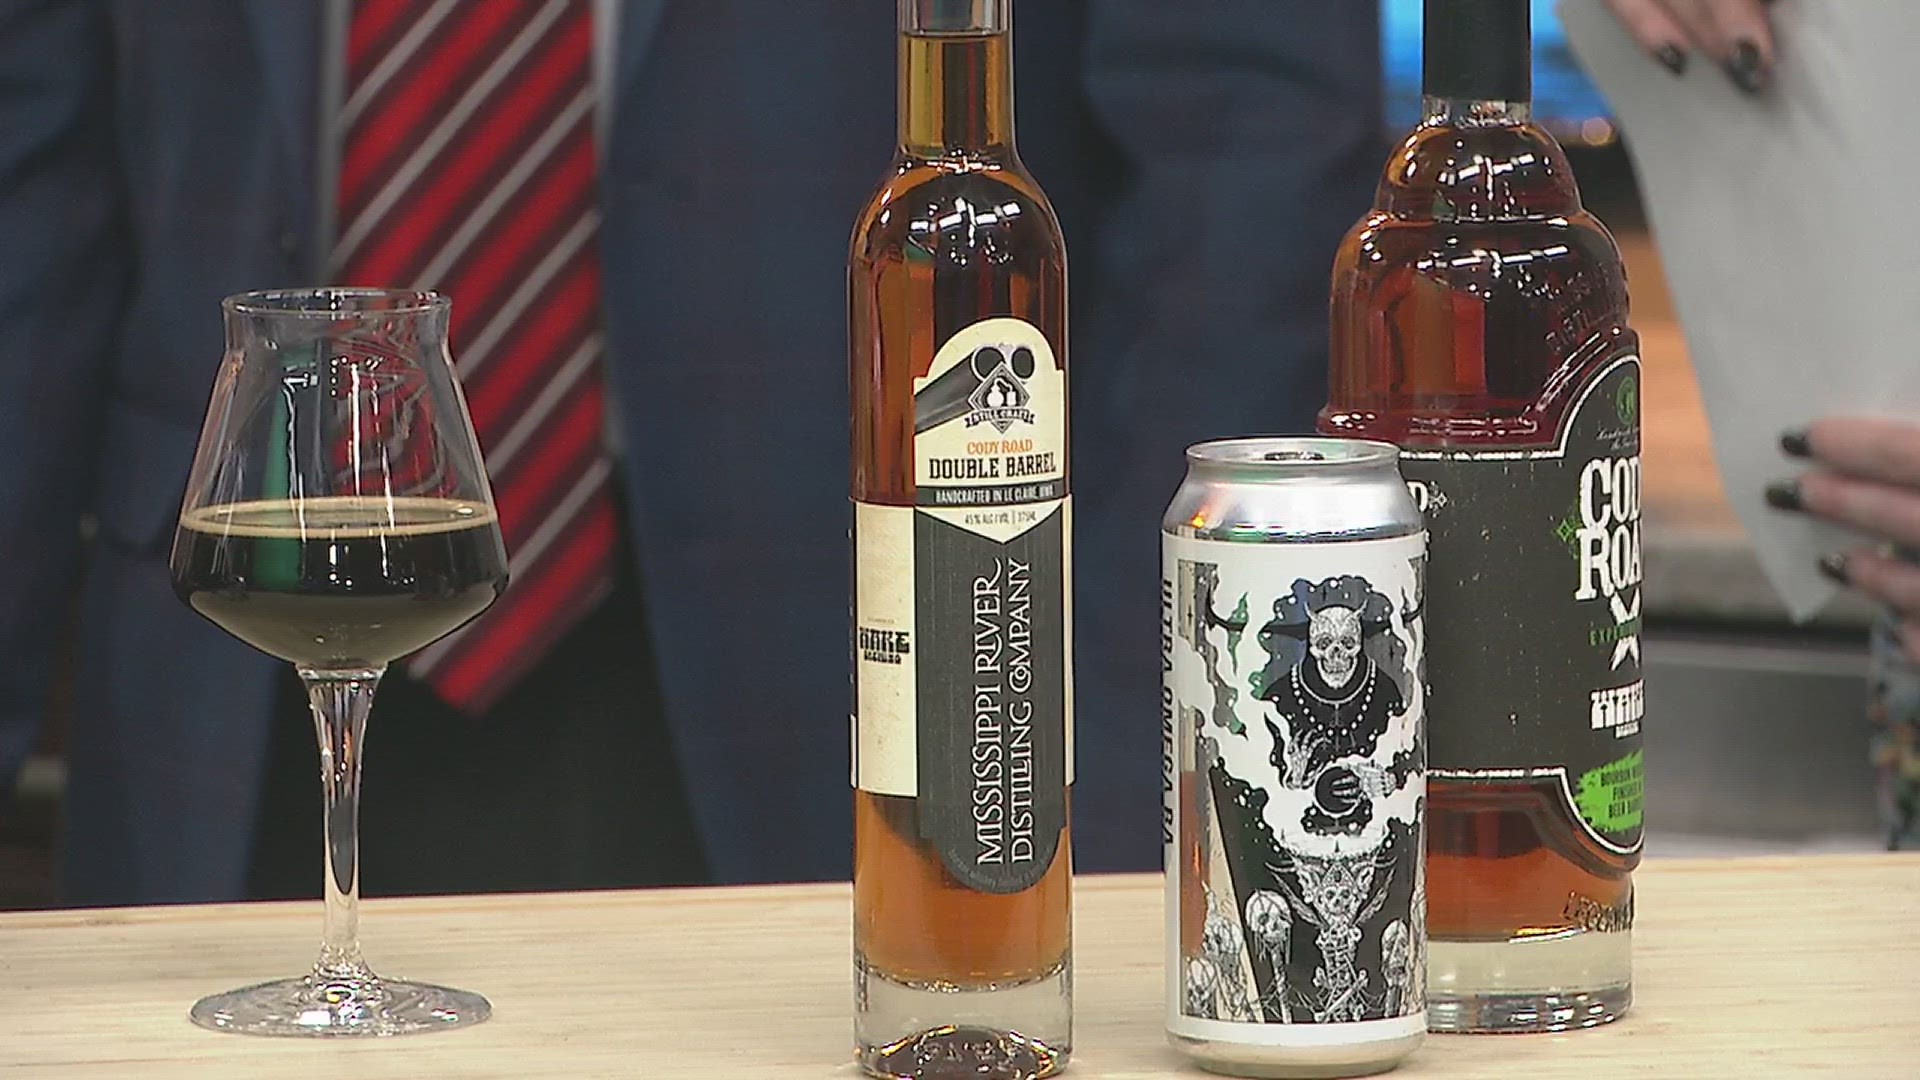 Deb Davis from Wake Brewing and Ryan Burchett from Mississippi River Distilling Co. join Nina and Devin in studio to talk their latest collaboration.